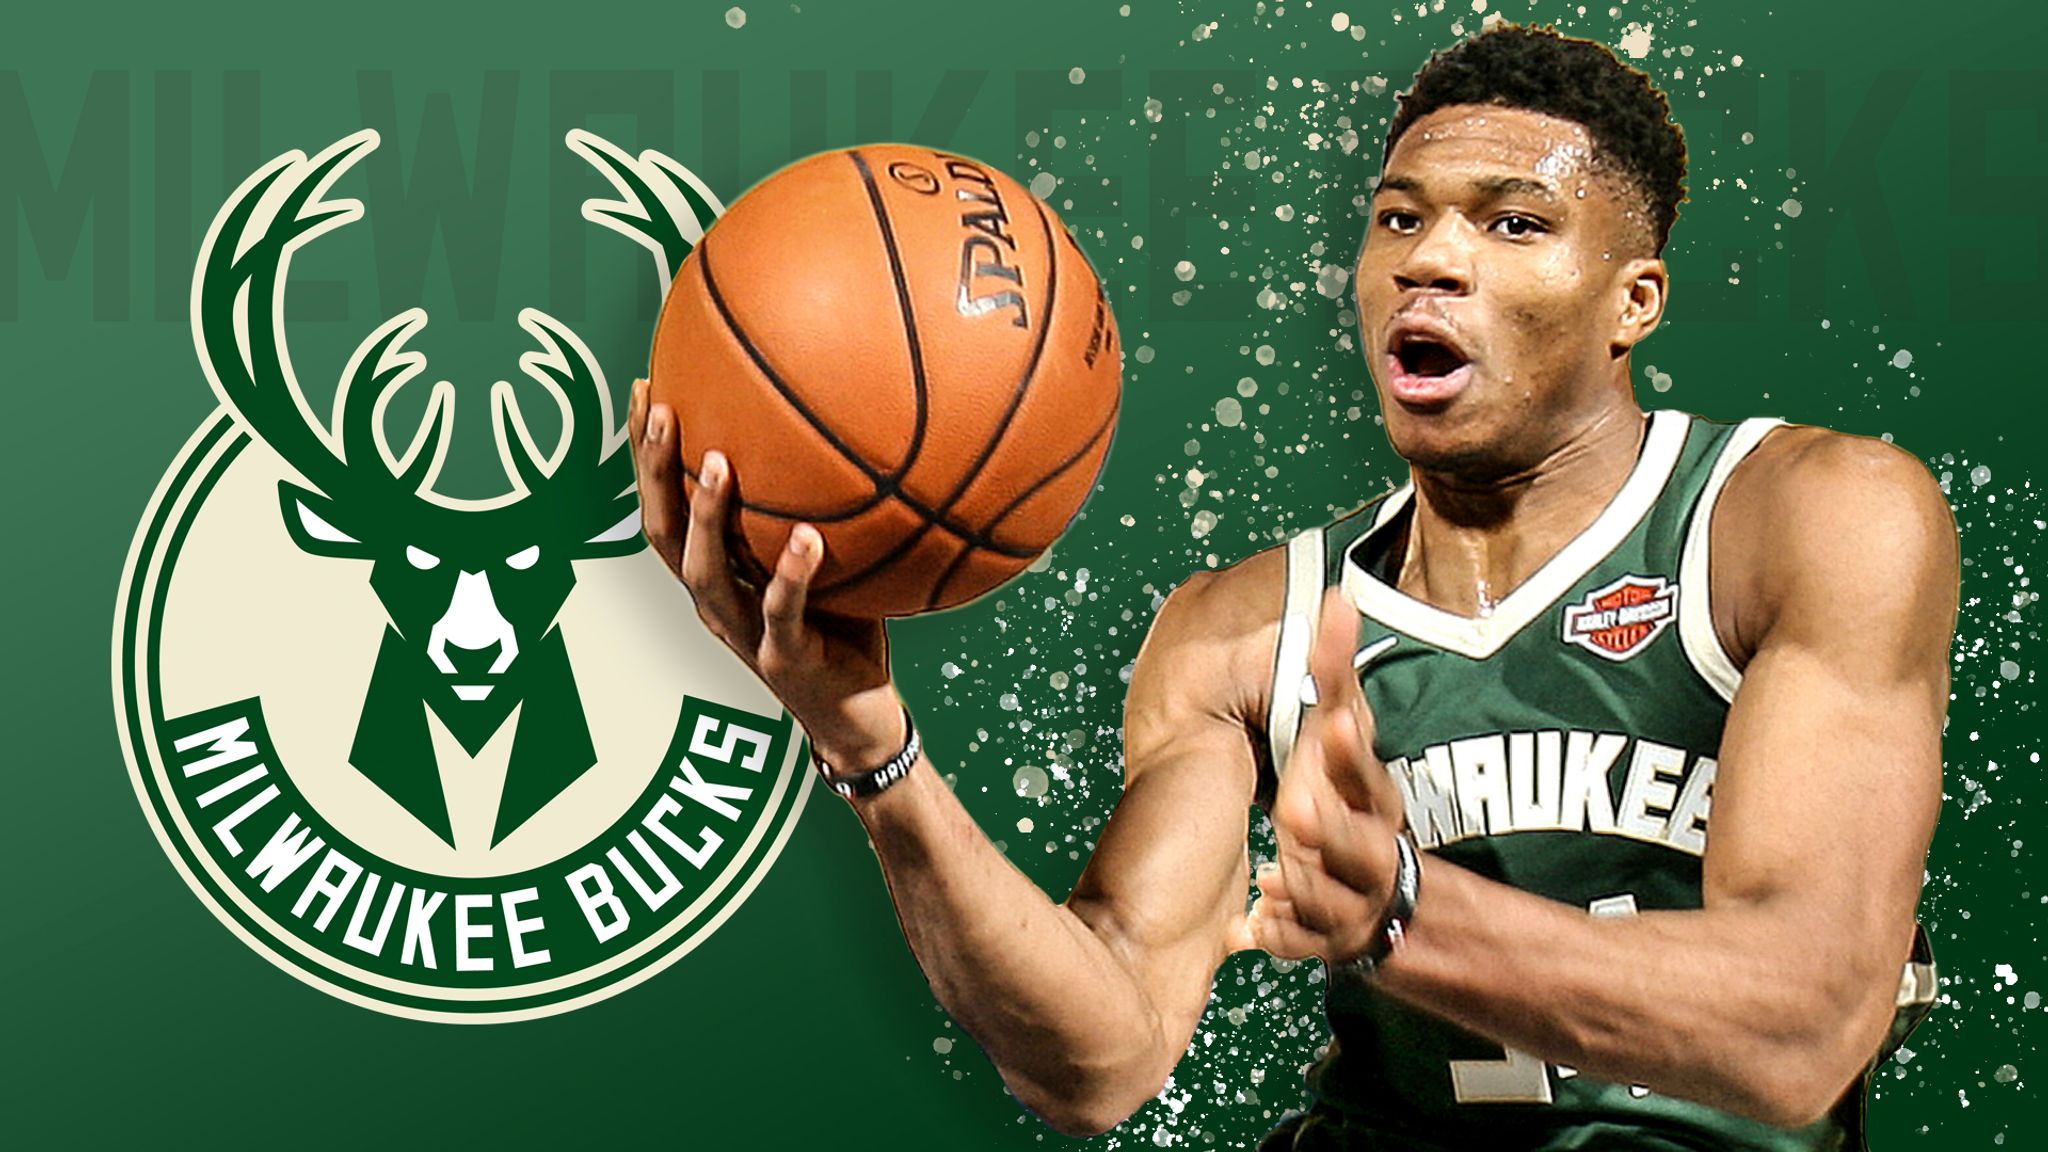 A force in the league. The Greek Freak. Giannis Antetokounmpo